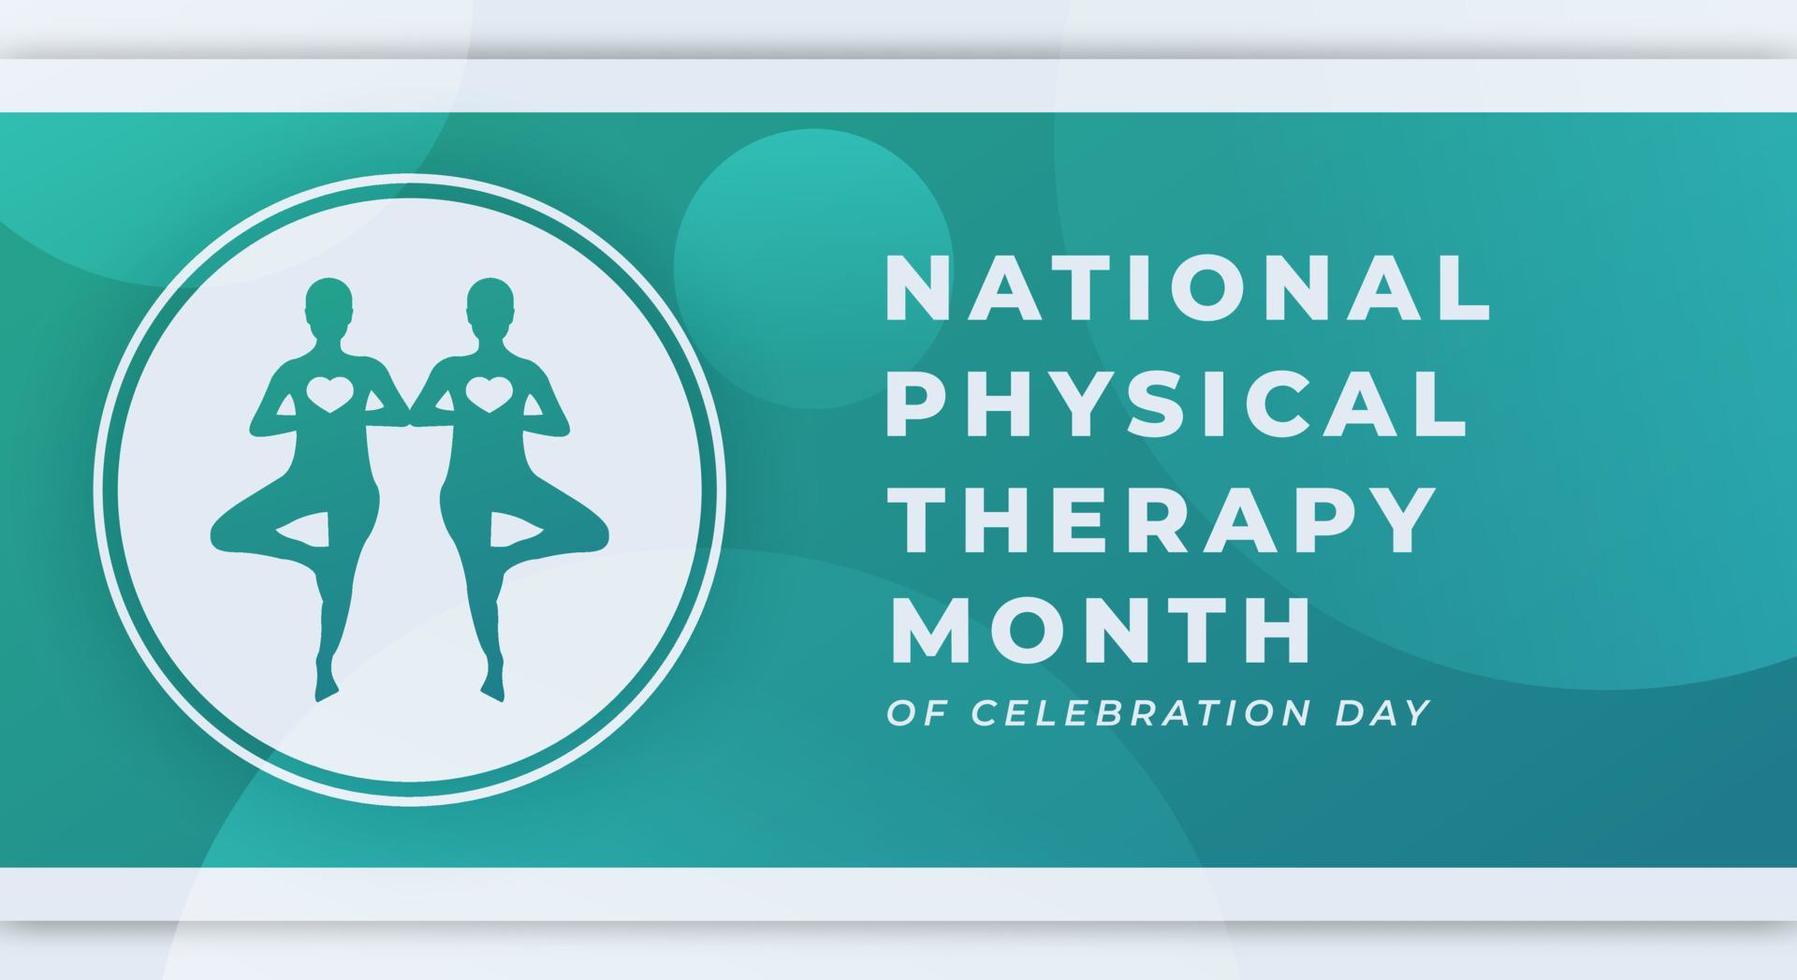 Happy Physical Therapy Month Celebration Vector Design Illustration for Background, Poster, Banner, Advertising, Greeting Card